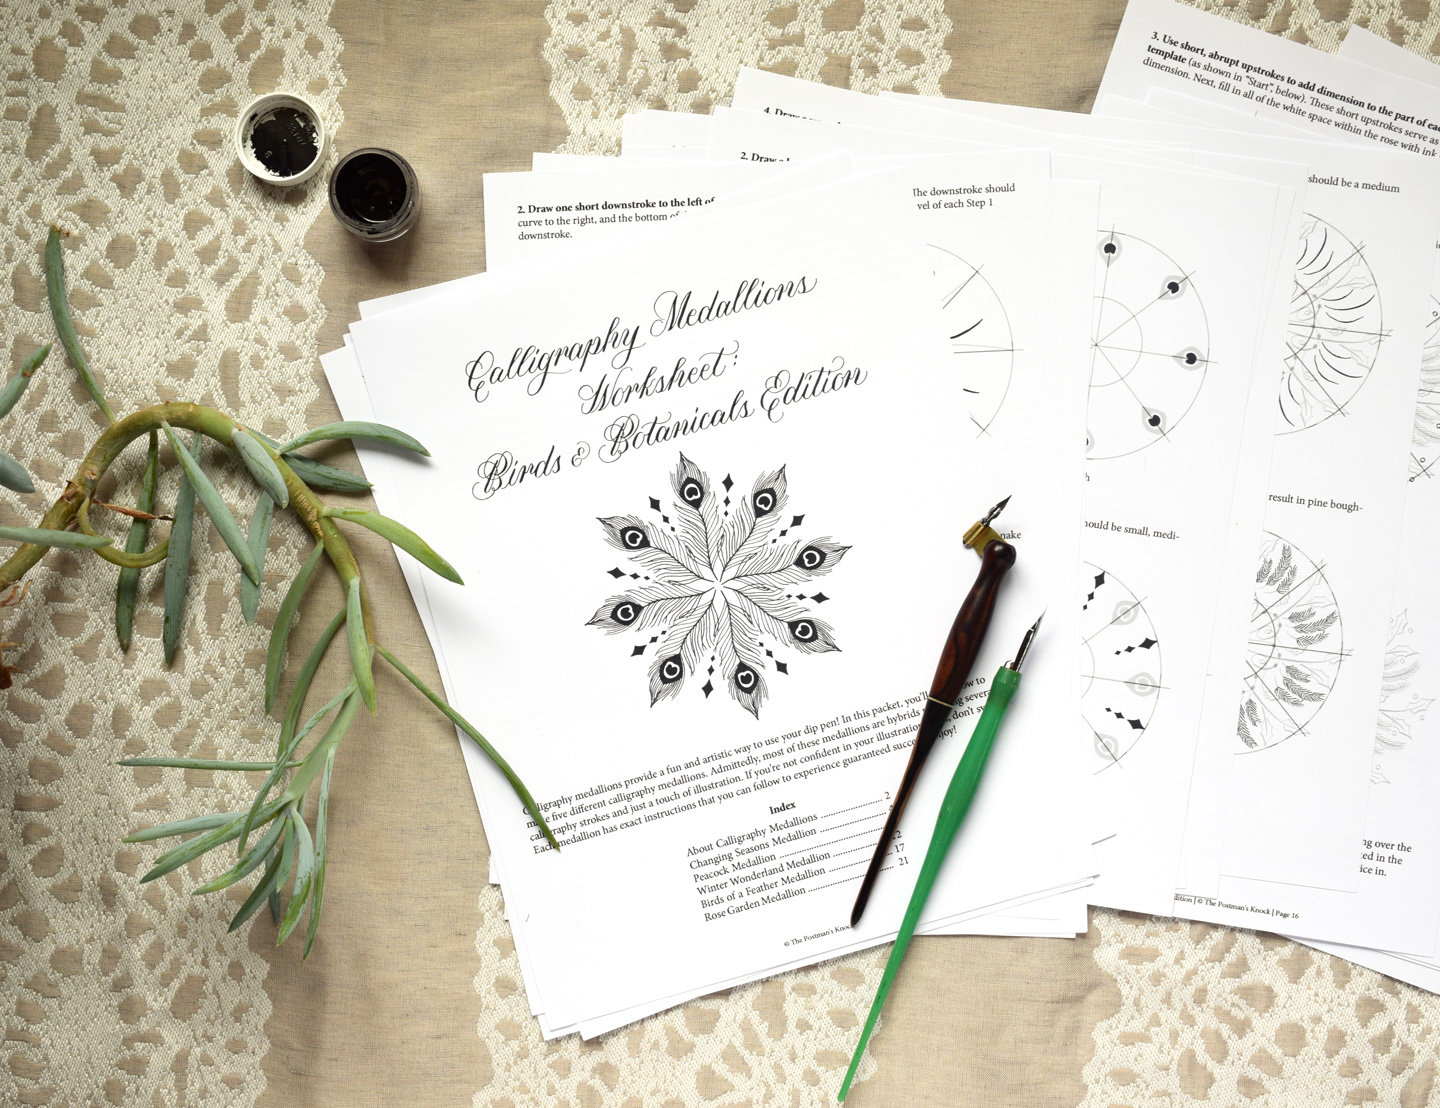 Introducing the Calligraphy Medallions Worksheet: Birds & Botanicals Edition